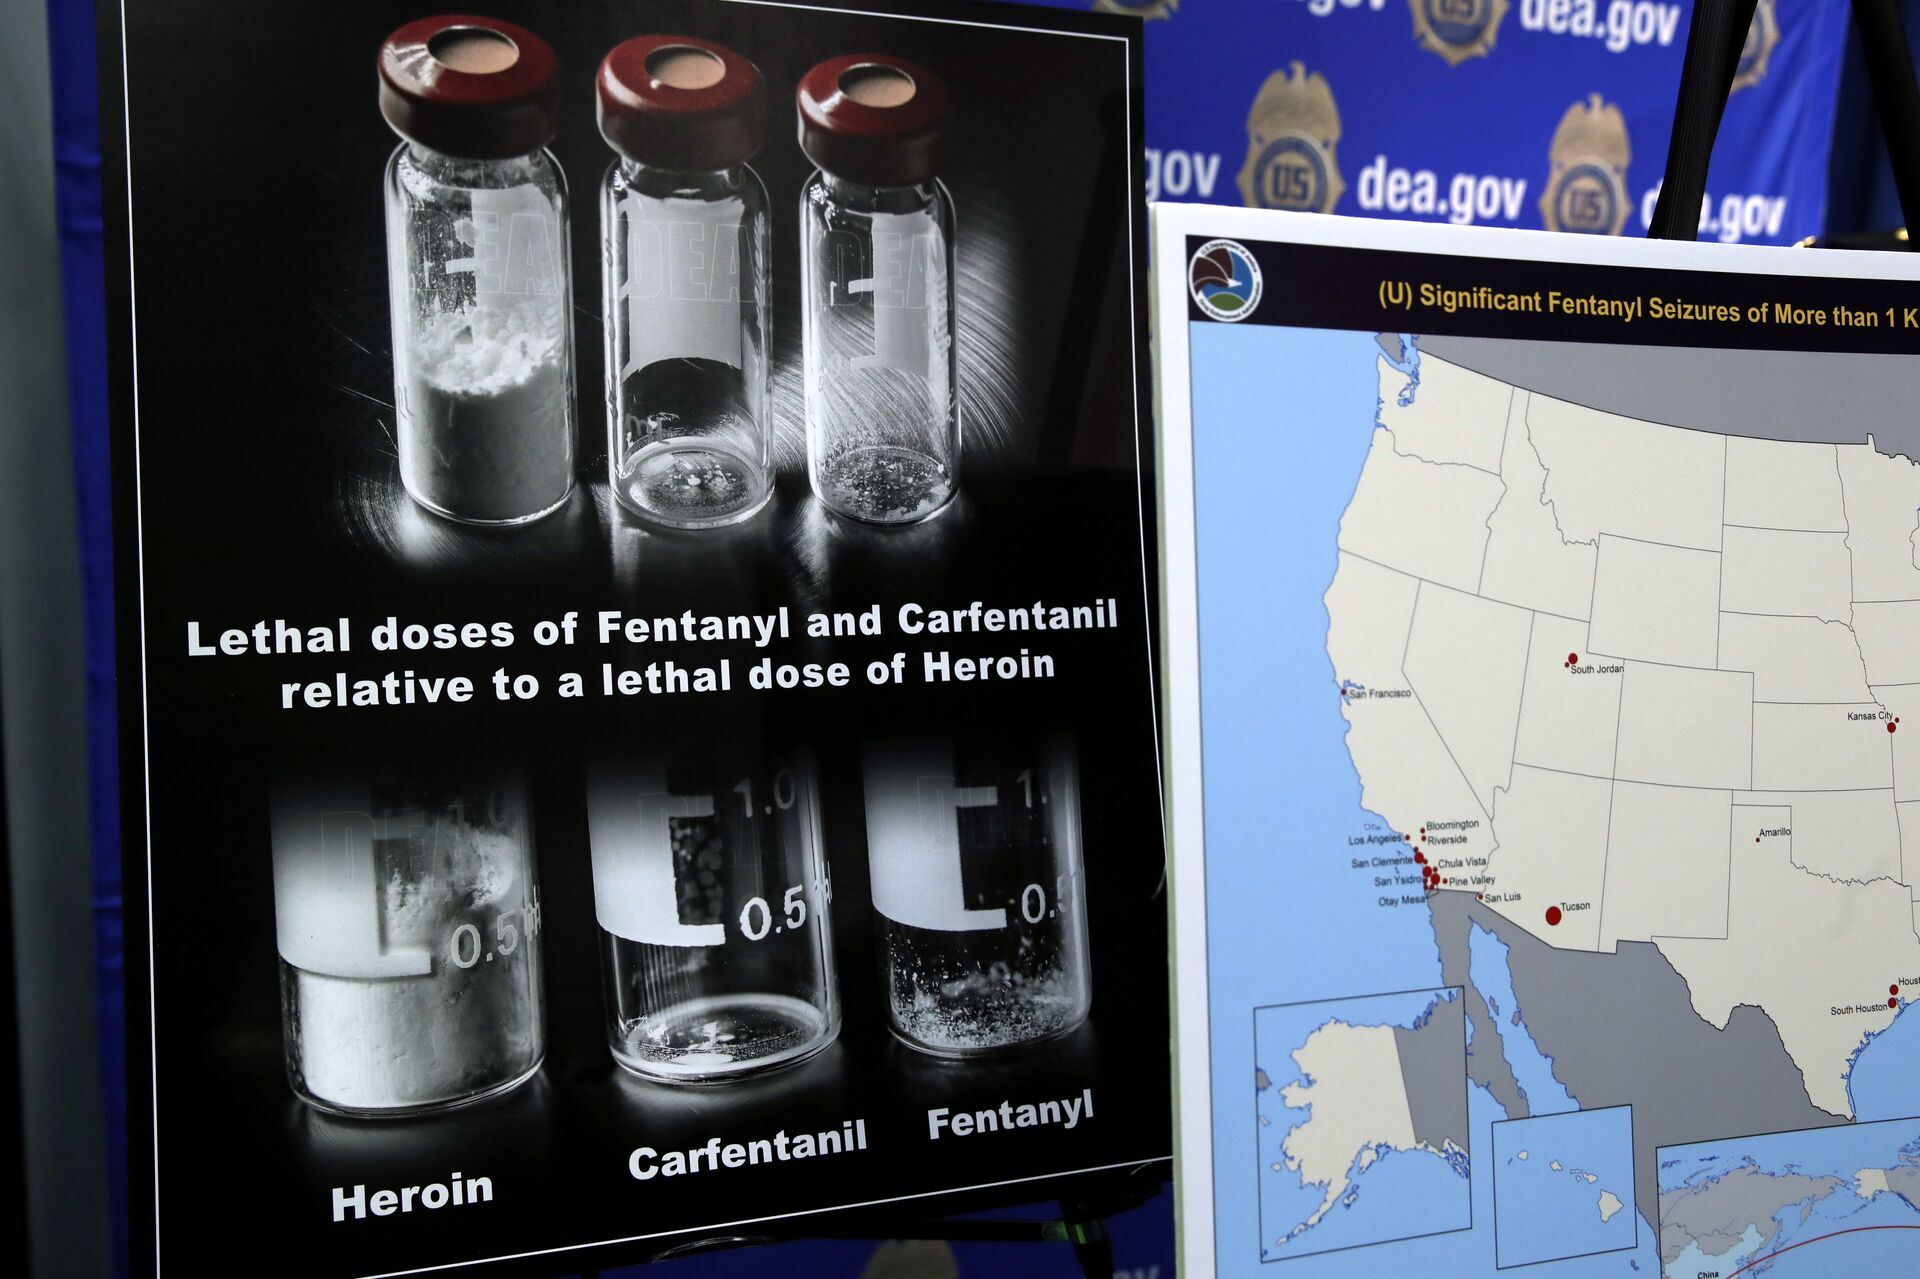 Posters comparing lethal amounts of heroin, fentanyl, and carfentanil, are on display during a news conference about the dangers of fentanyl, at DEA Headquarters in Arlington, Tuesday, June 6, 2017.  - Sputnik International, 1920, 22.12.2022